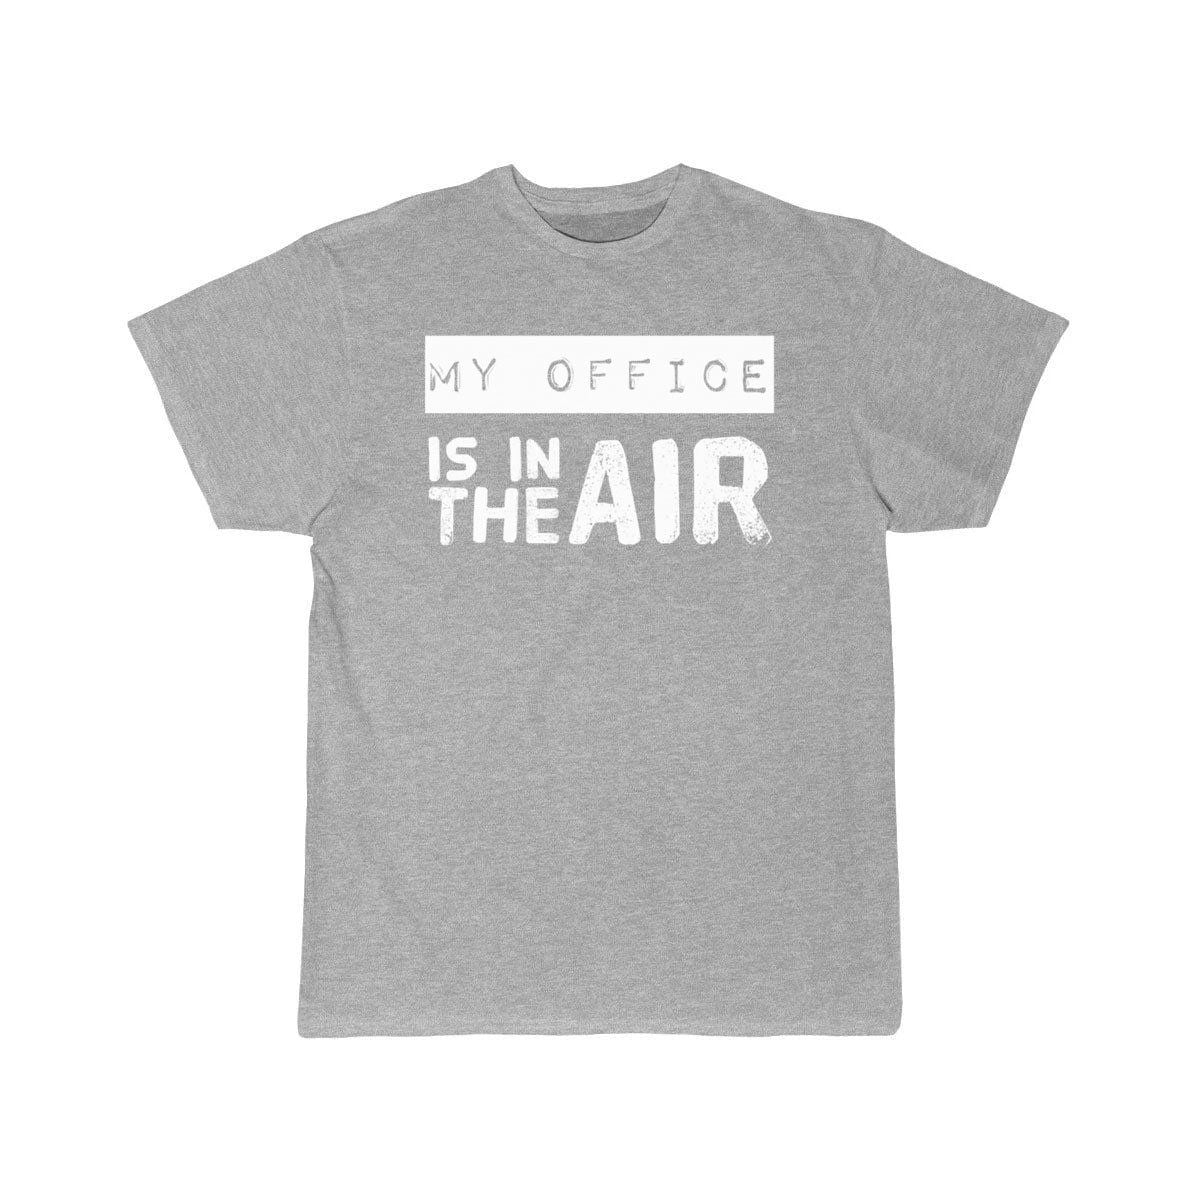 My office is in the air T-SHIRT THE AV8R